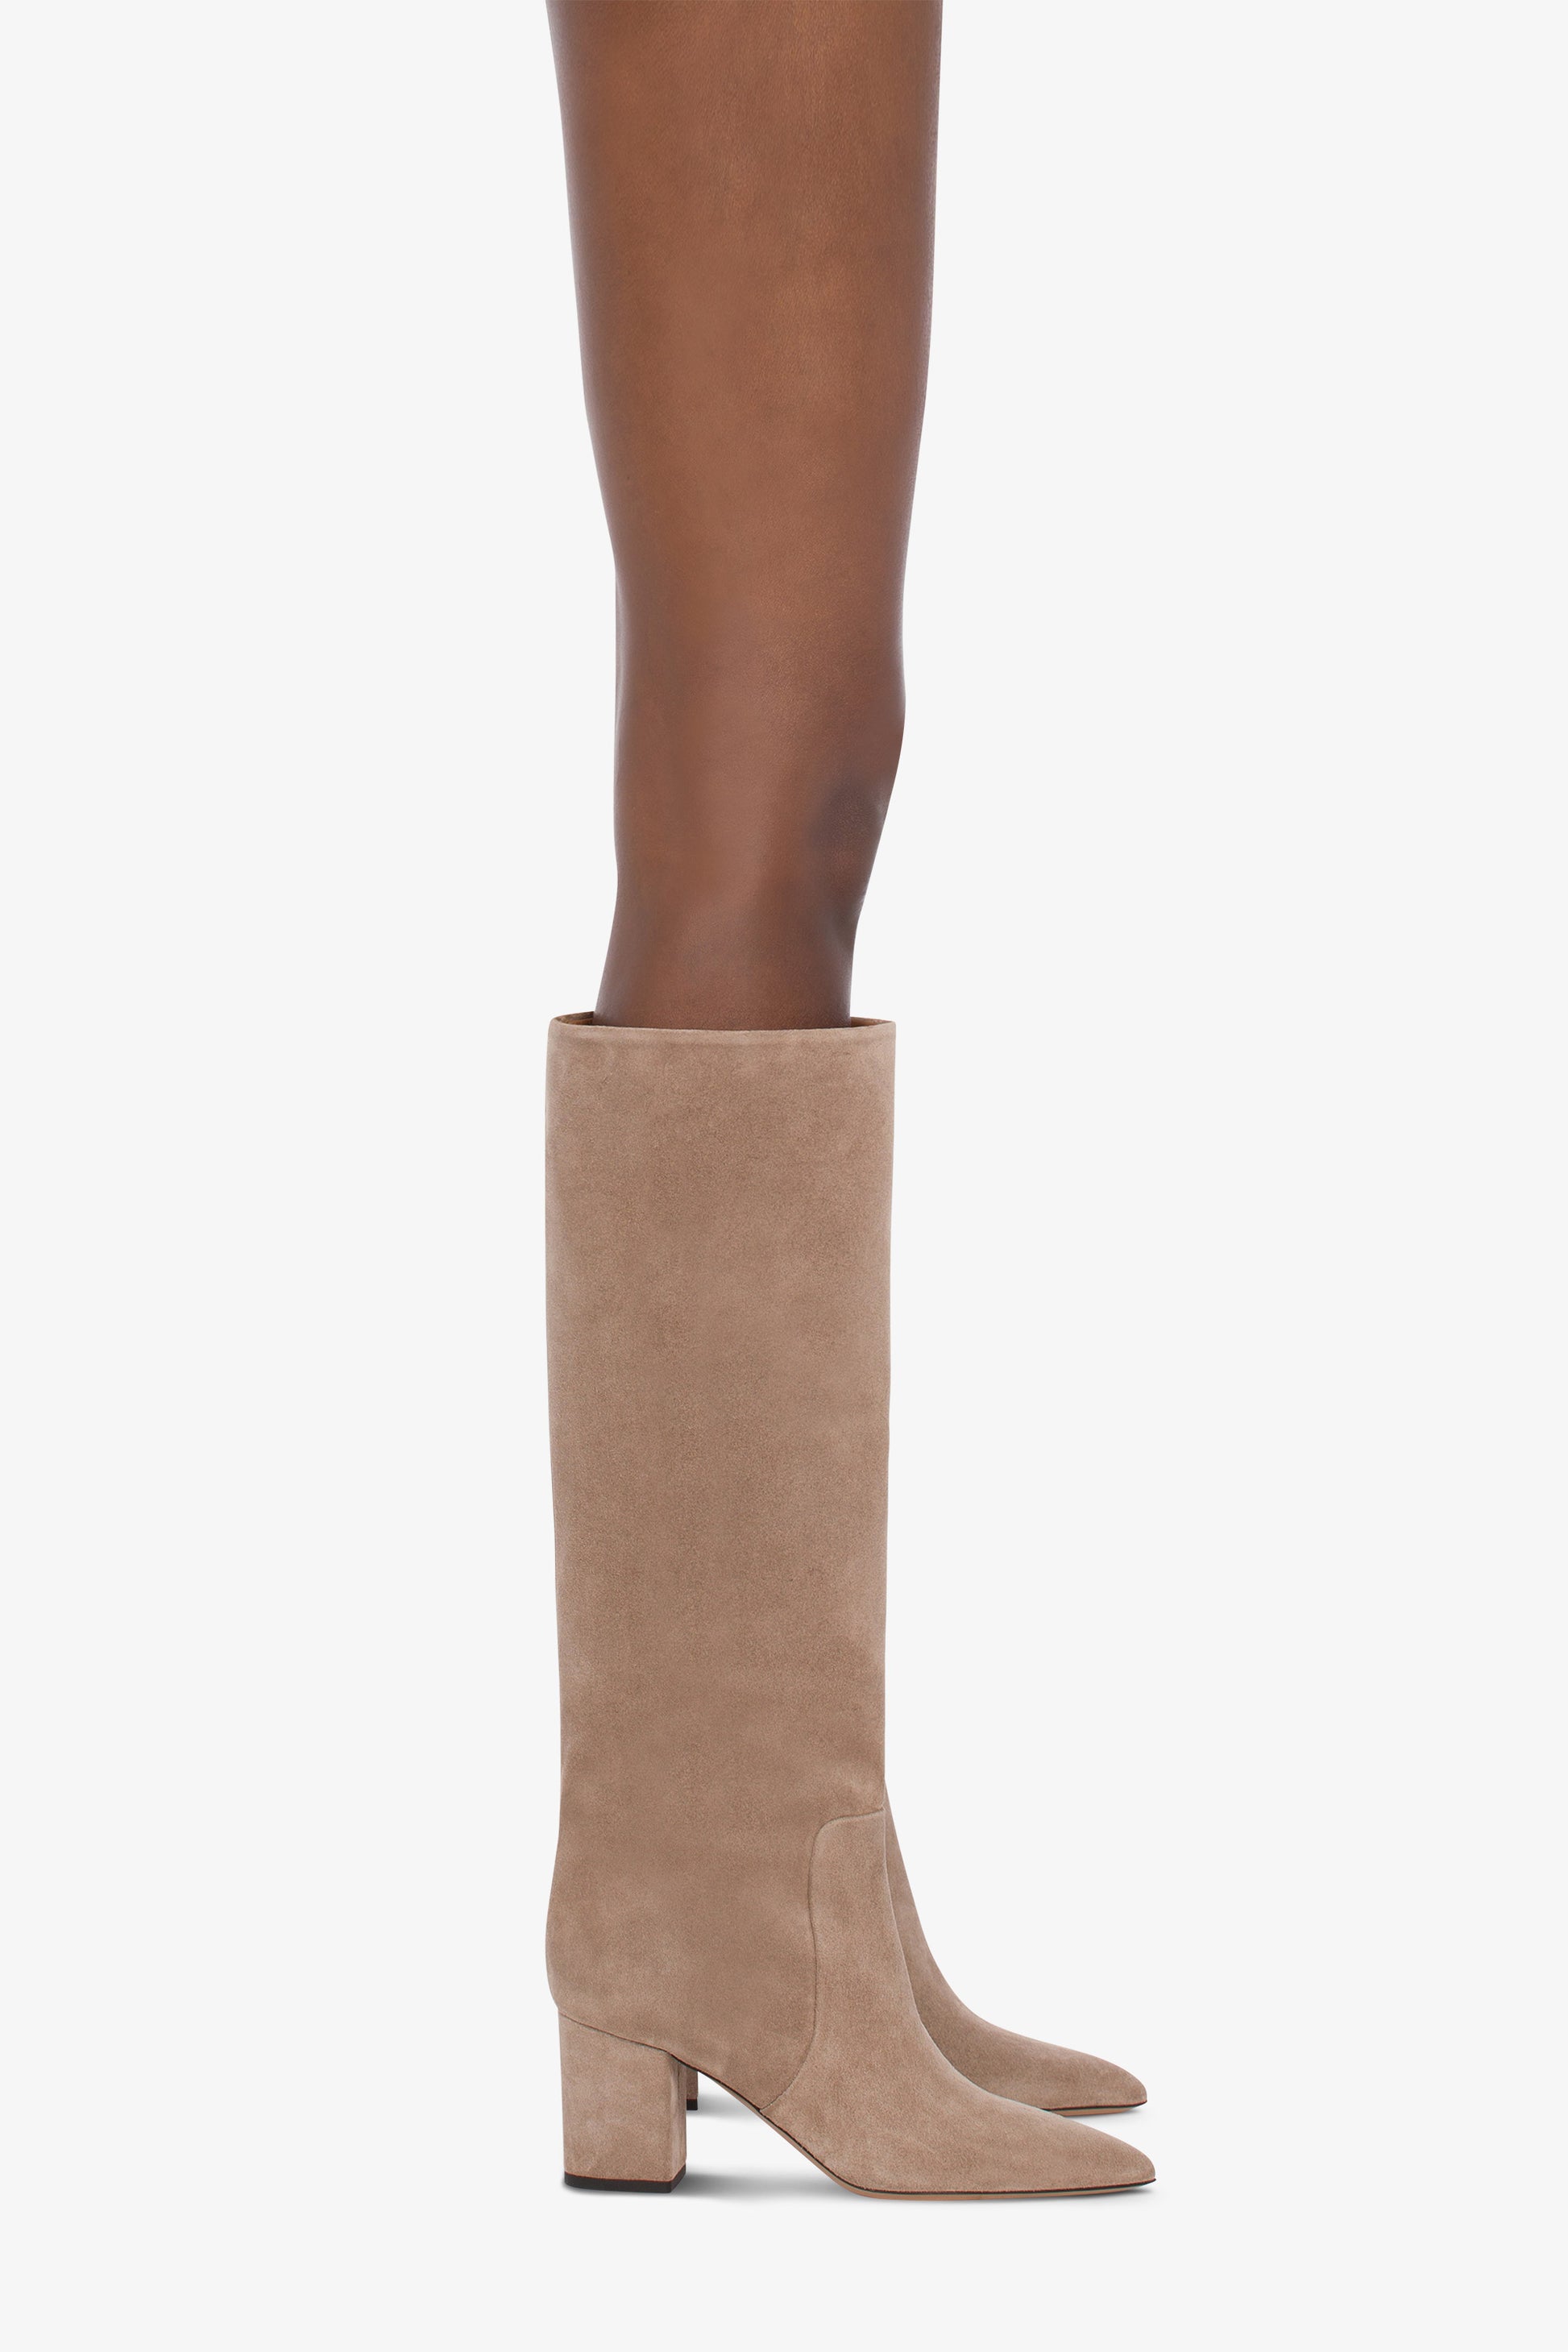 Knee-high boots in soft koala suede leather - Product worn